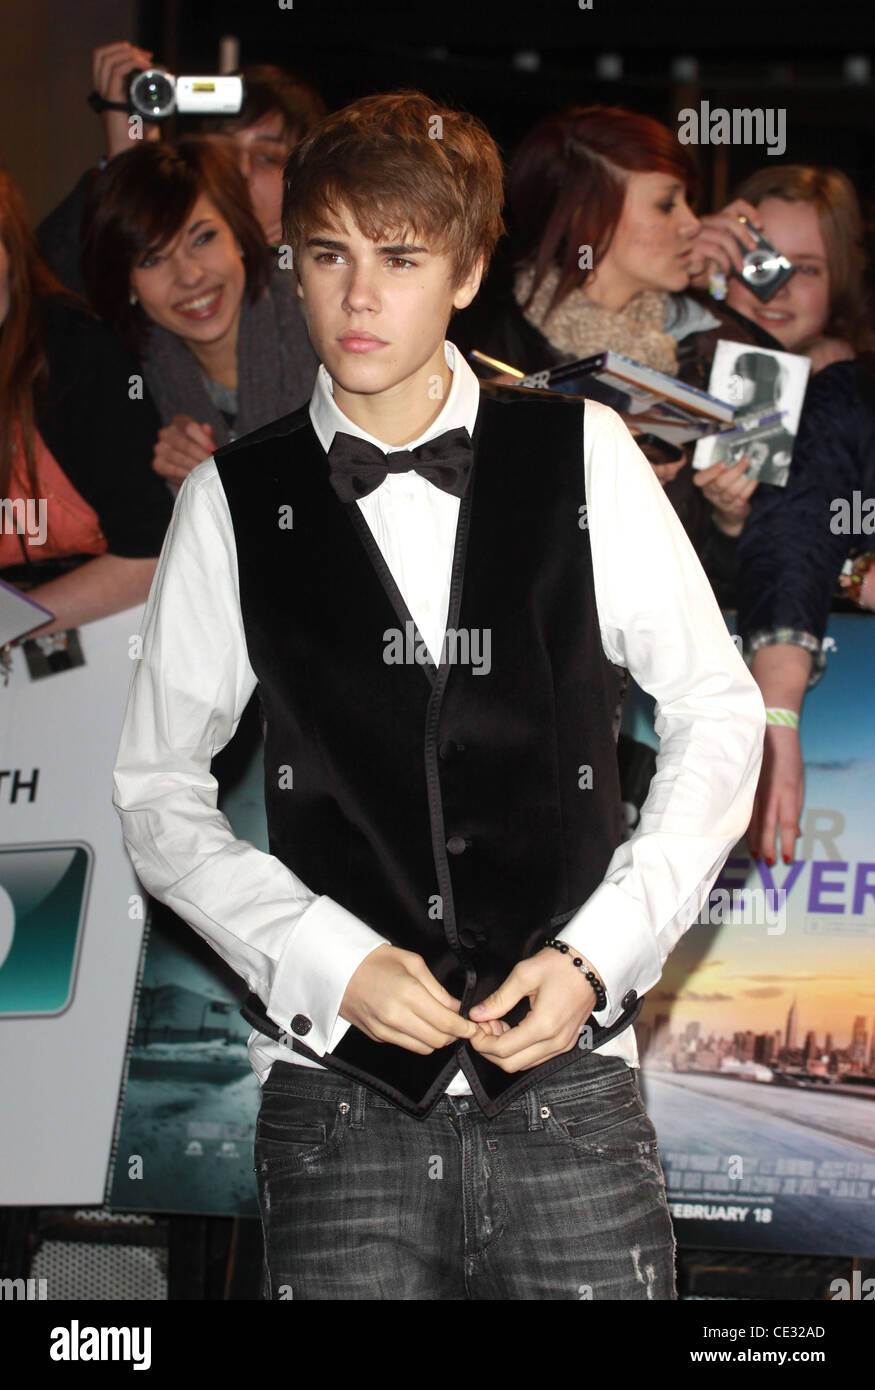 Justin Bieber Never Say Never UK film premiere held at the O2 London, England - 16.02.11 Stock Photo